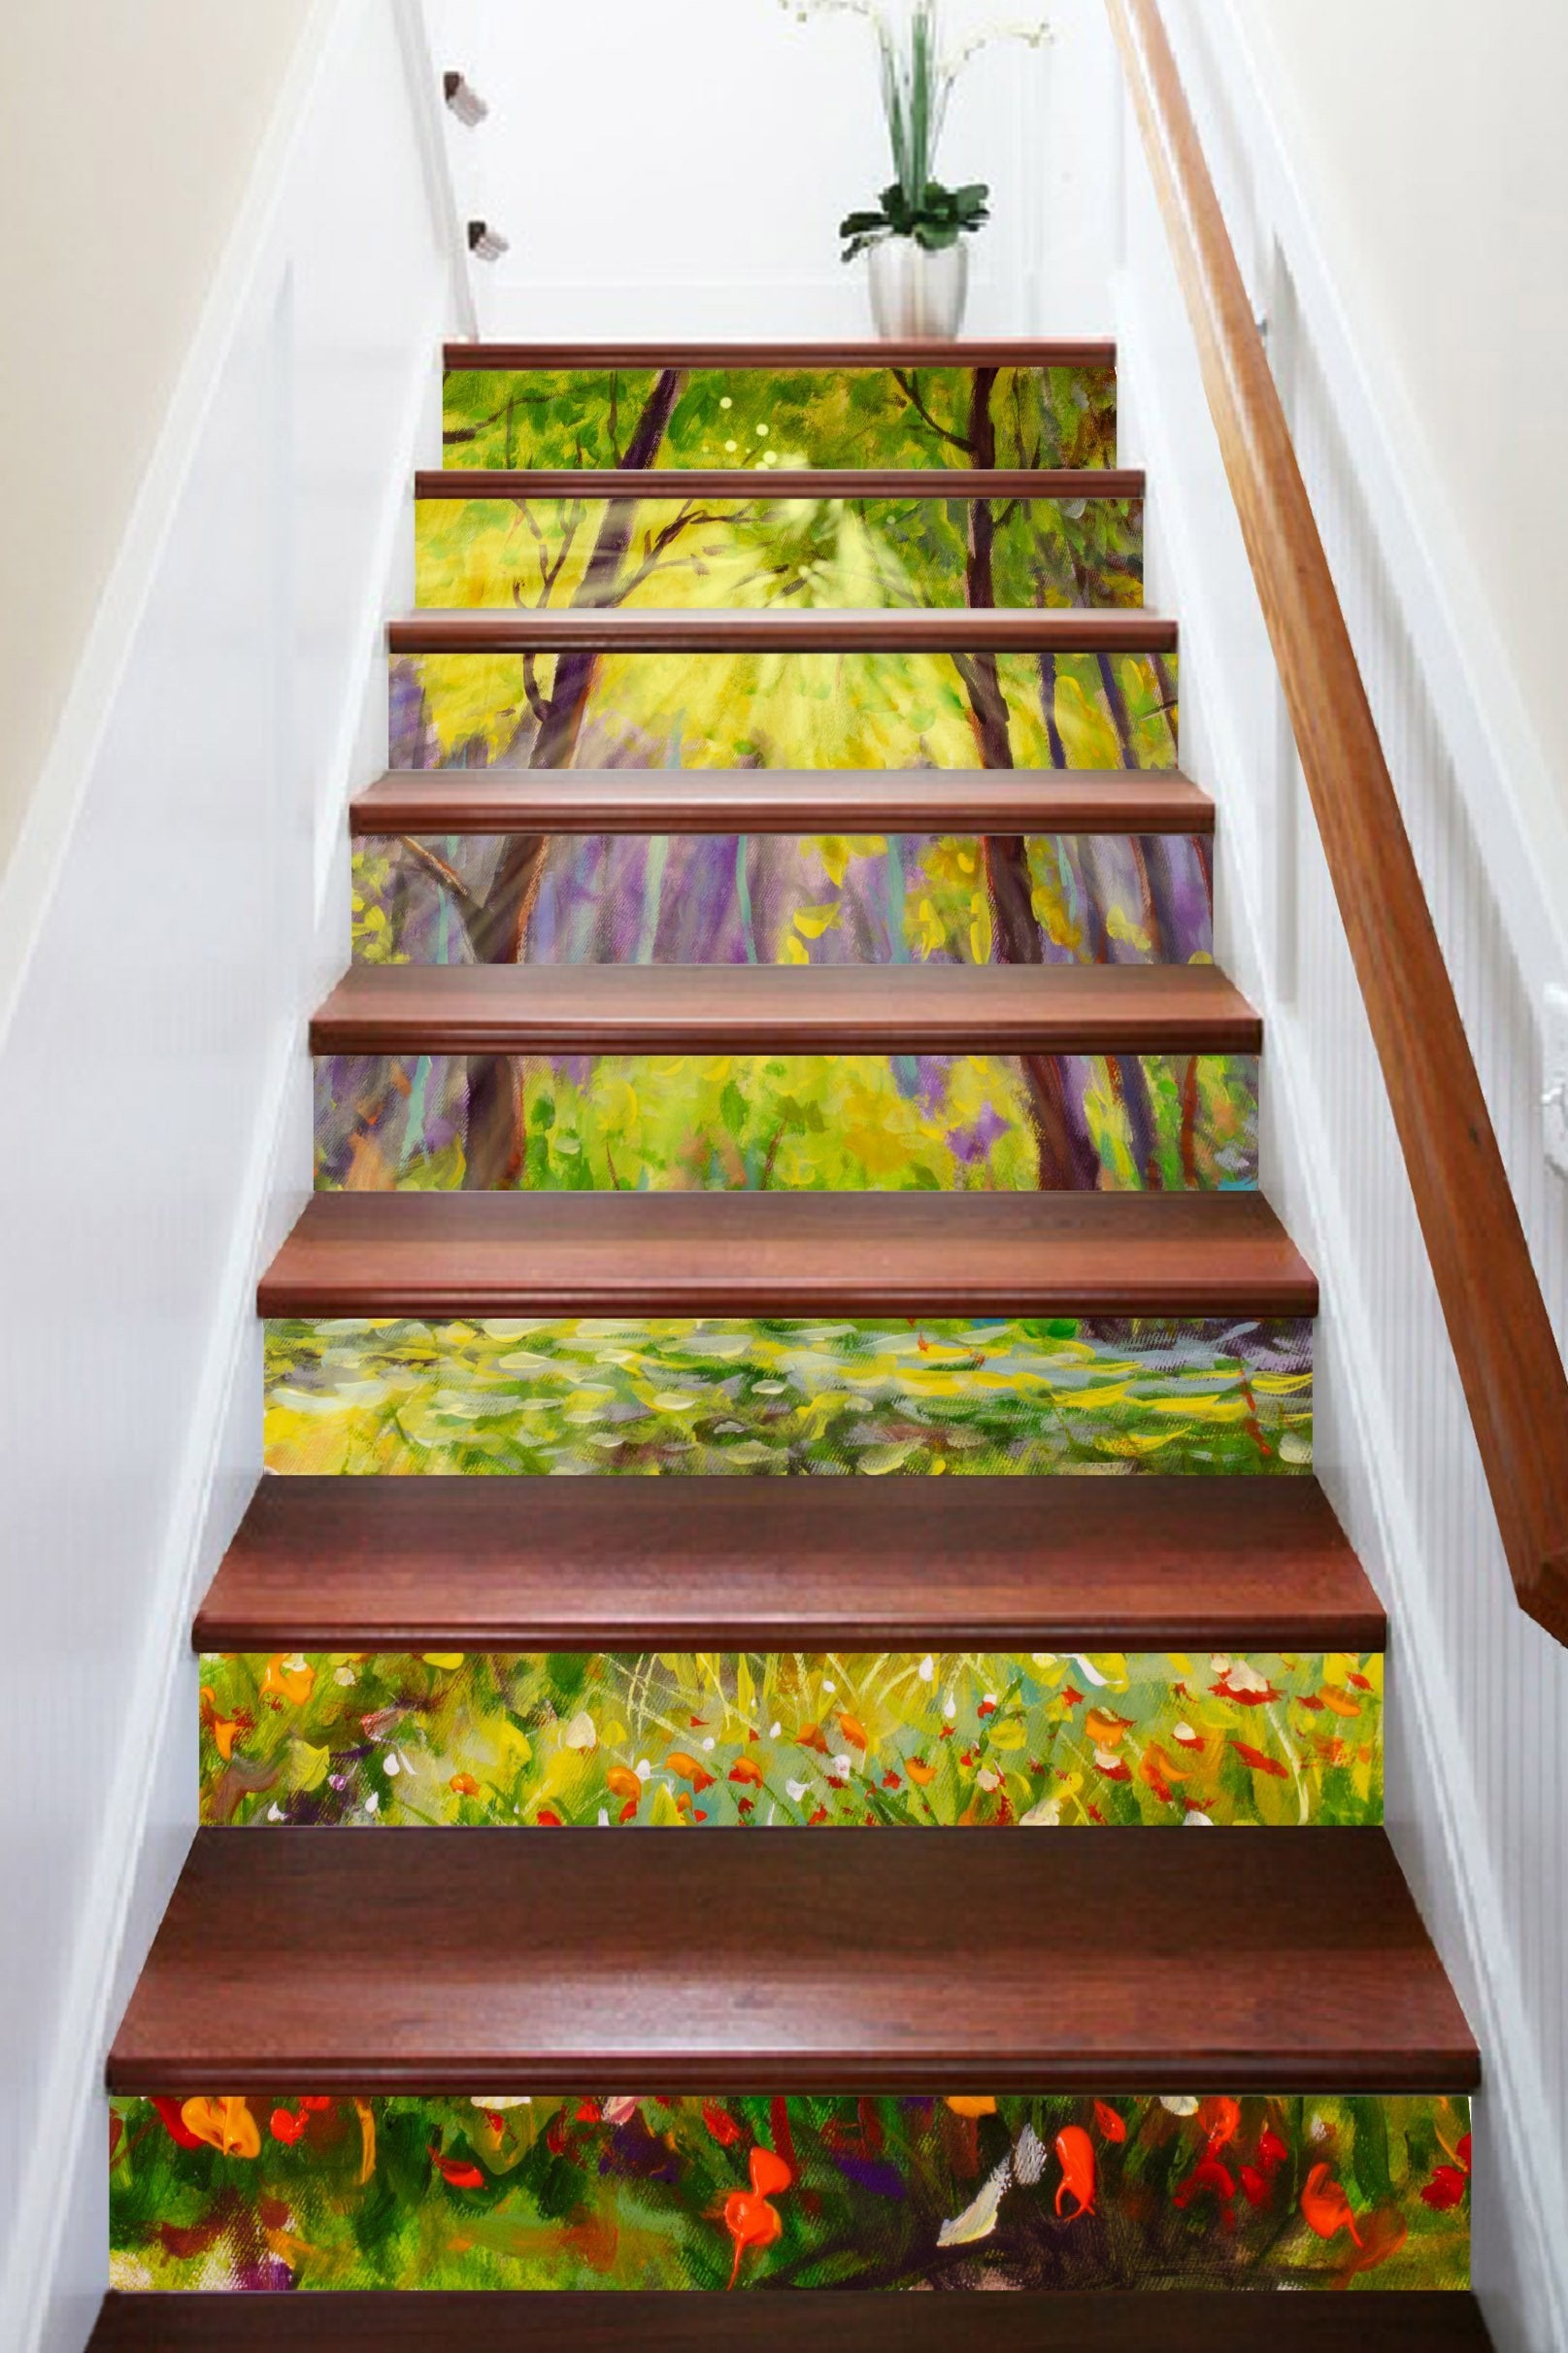 3D Oil Painting Forest 74 Stair Risers Wallpaper AJ Wallpaper 